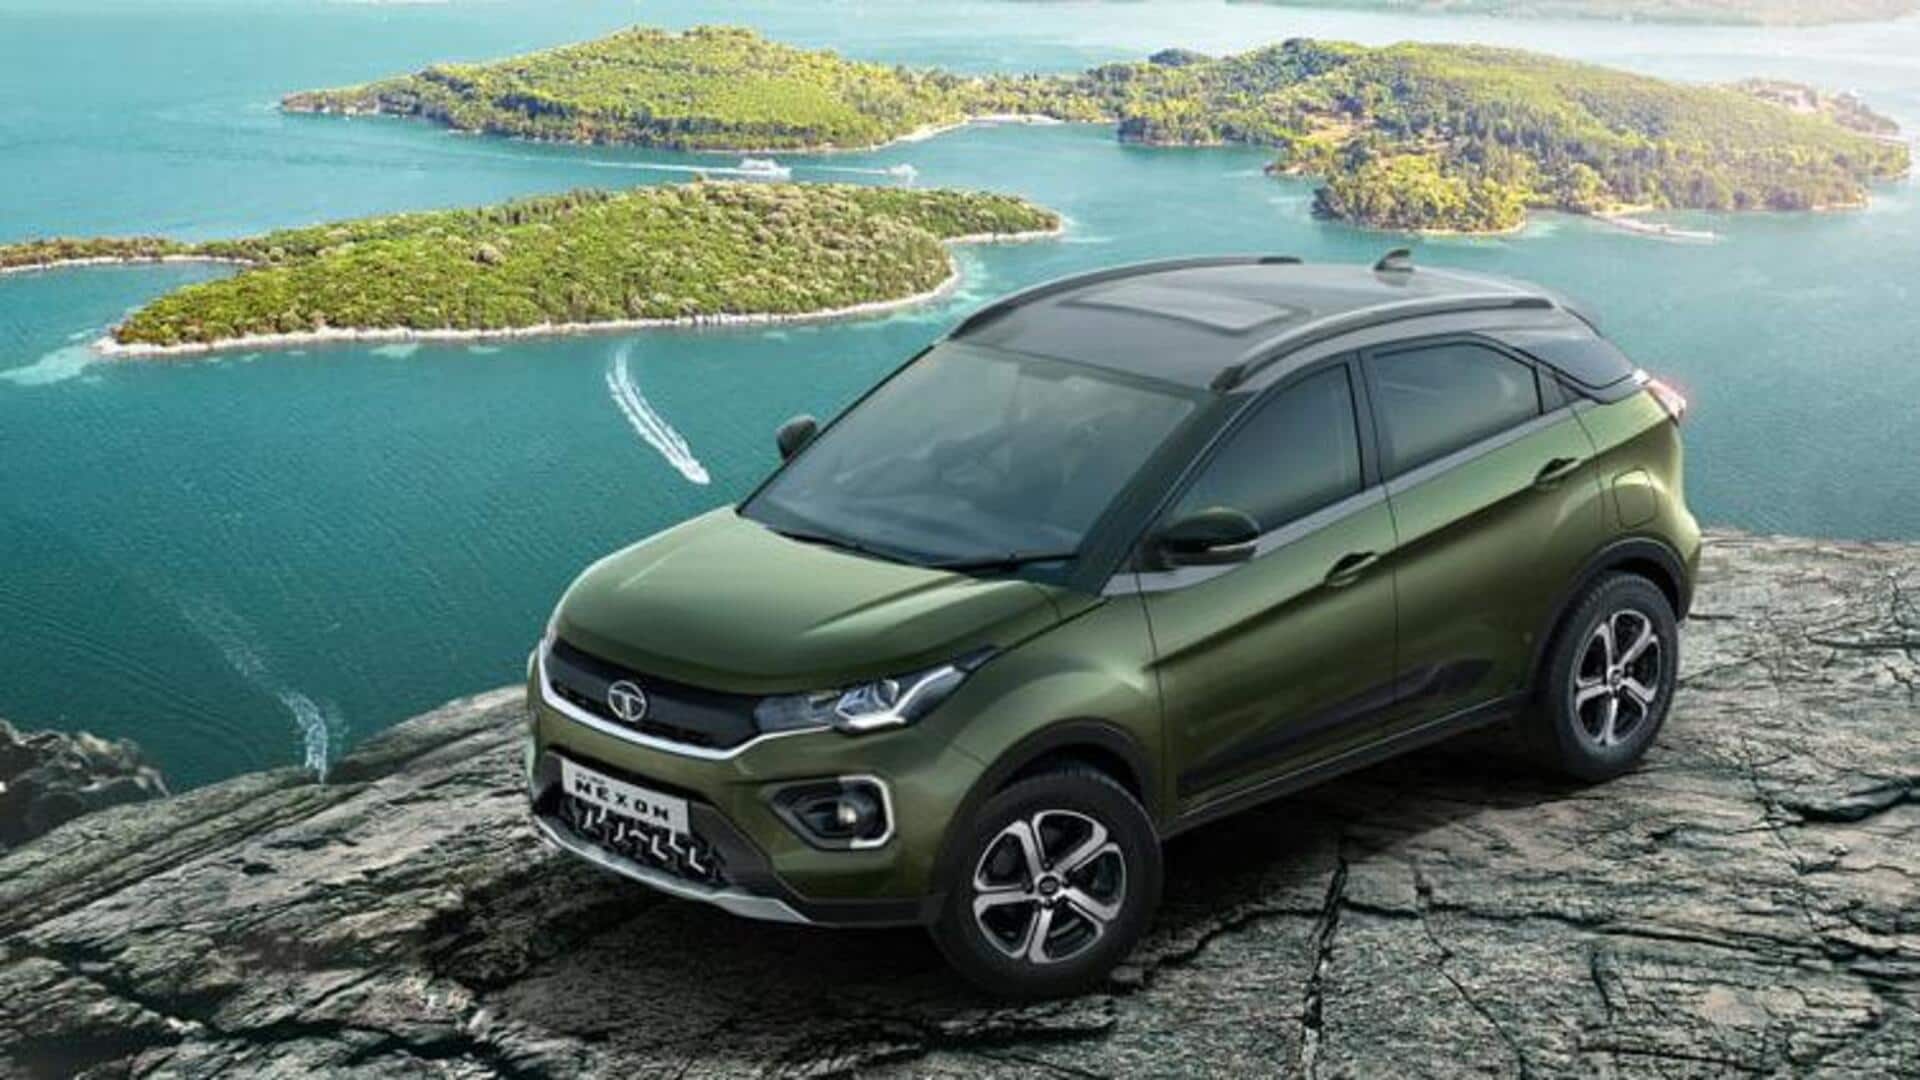 Tata Nexon (facelift) will offer a smoother driving experience